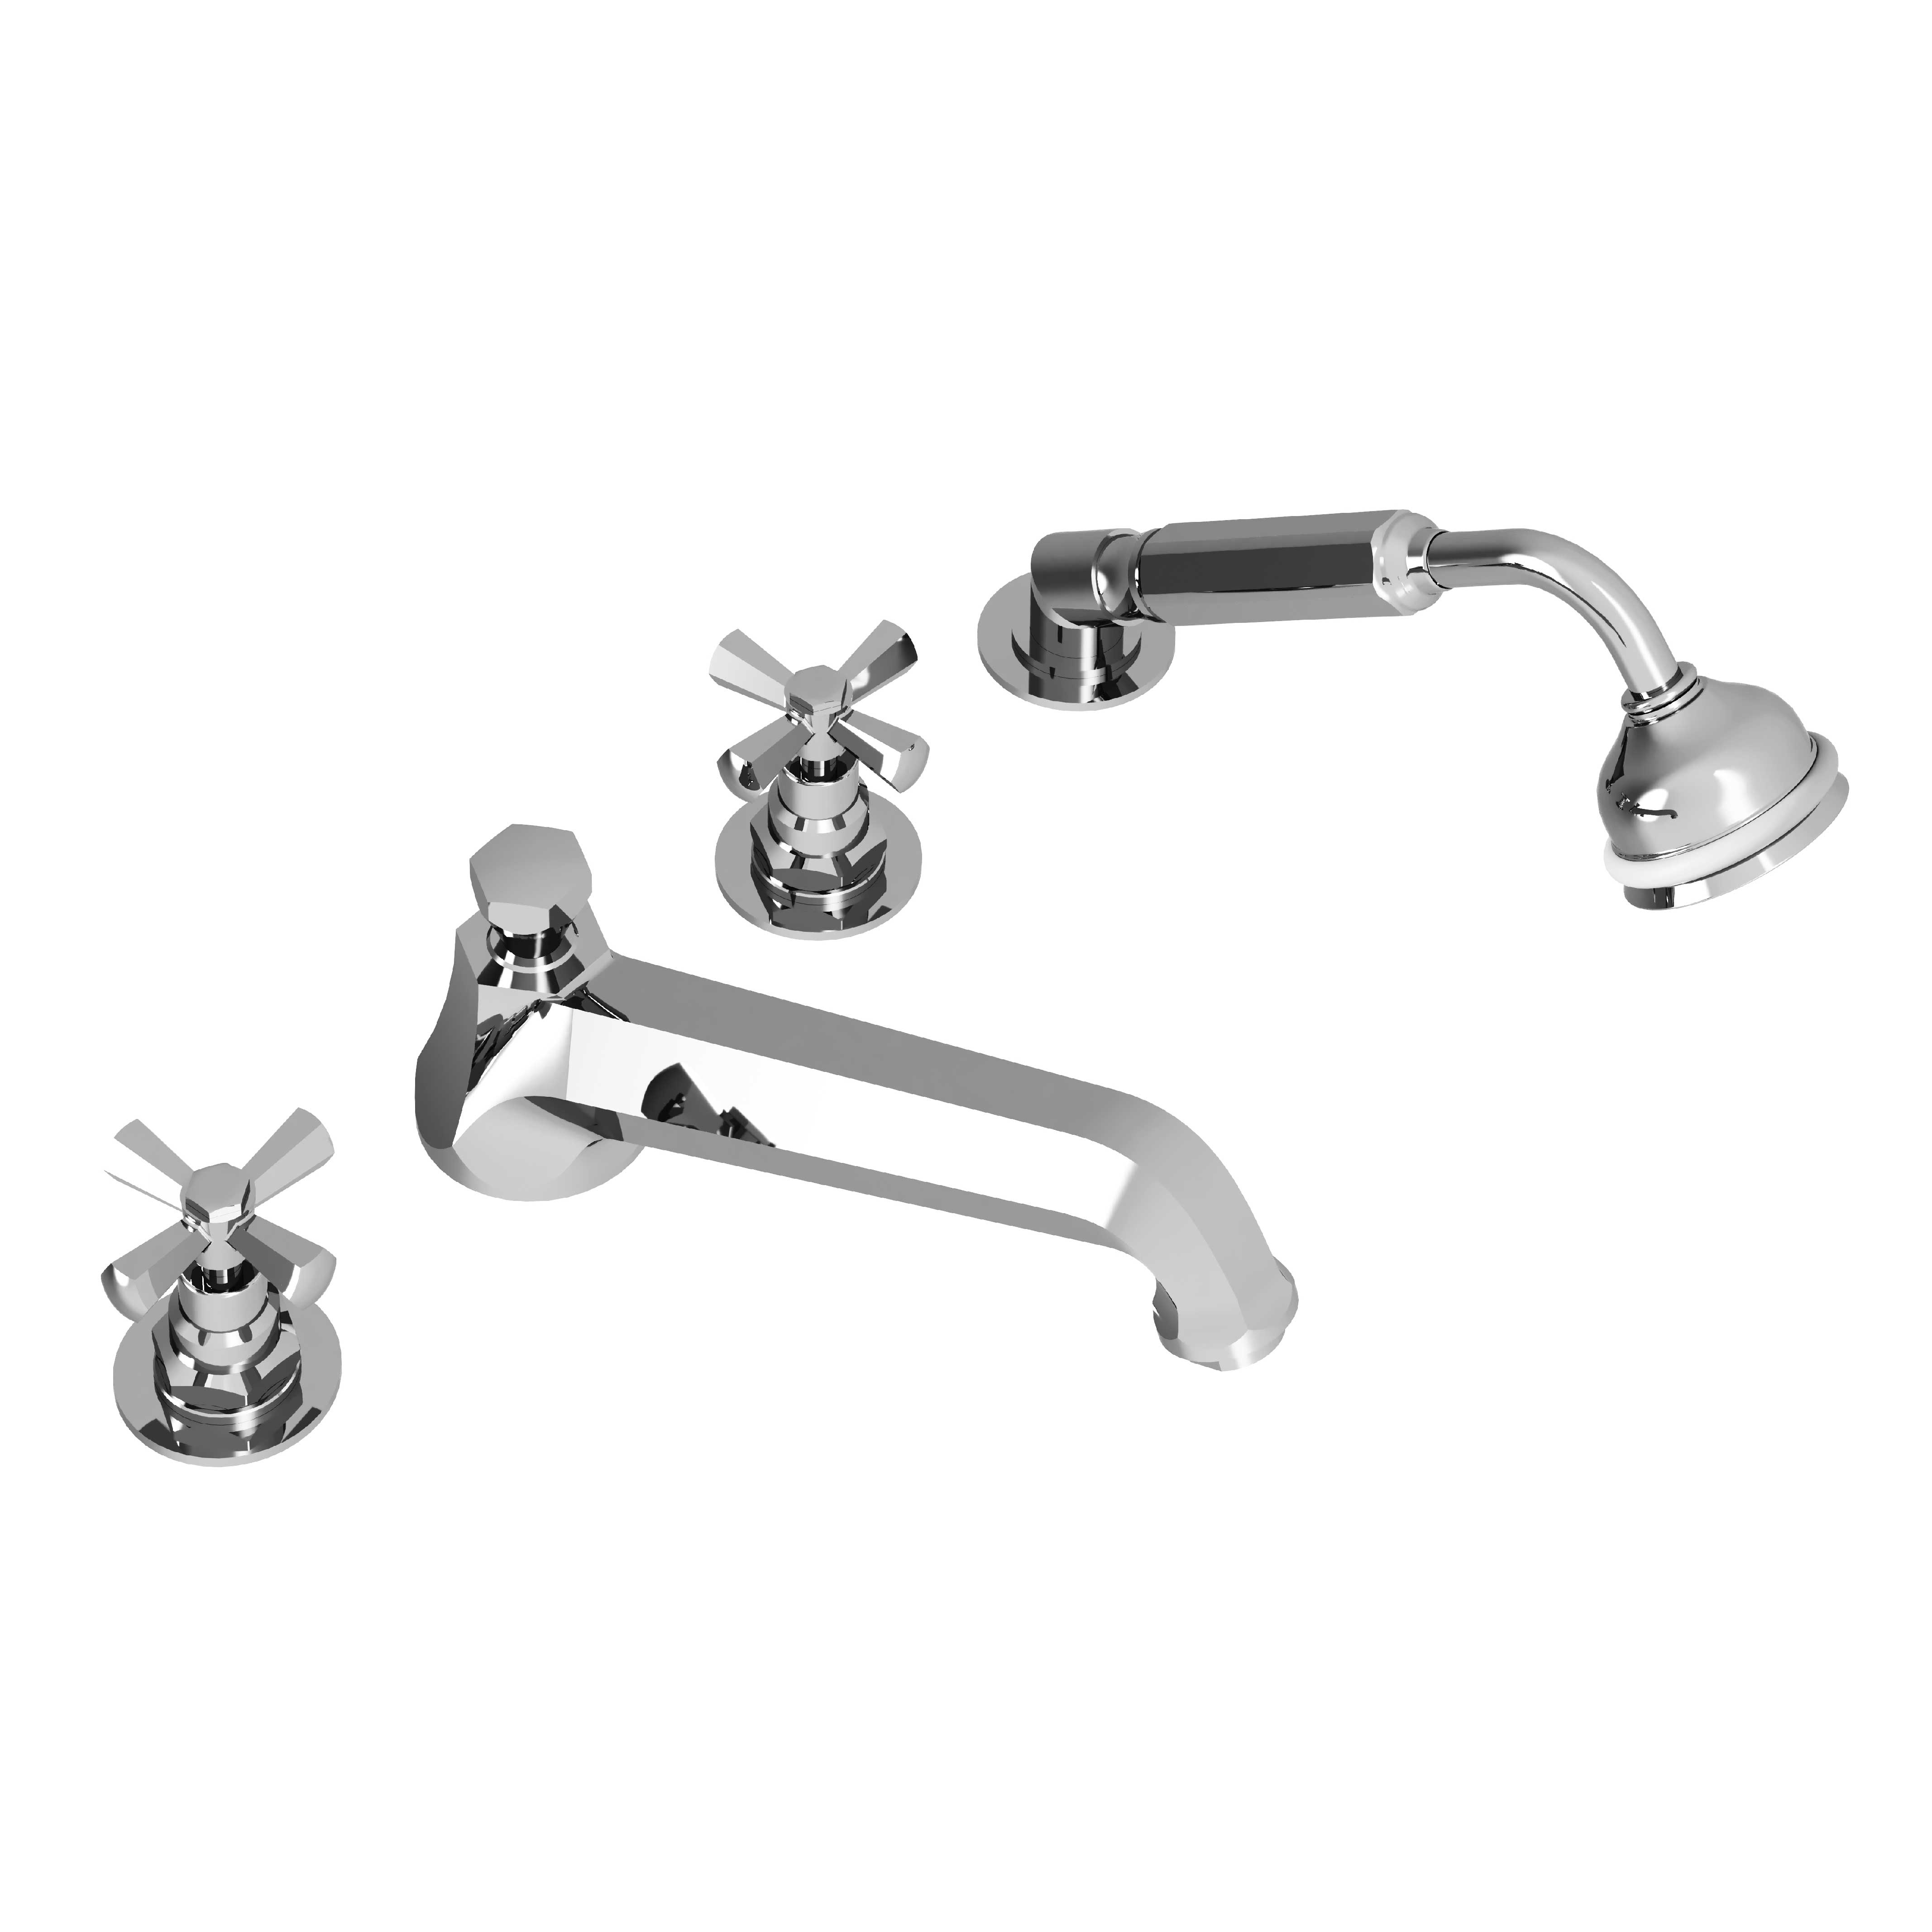 M38-3304 4-hole bath and shower mixer